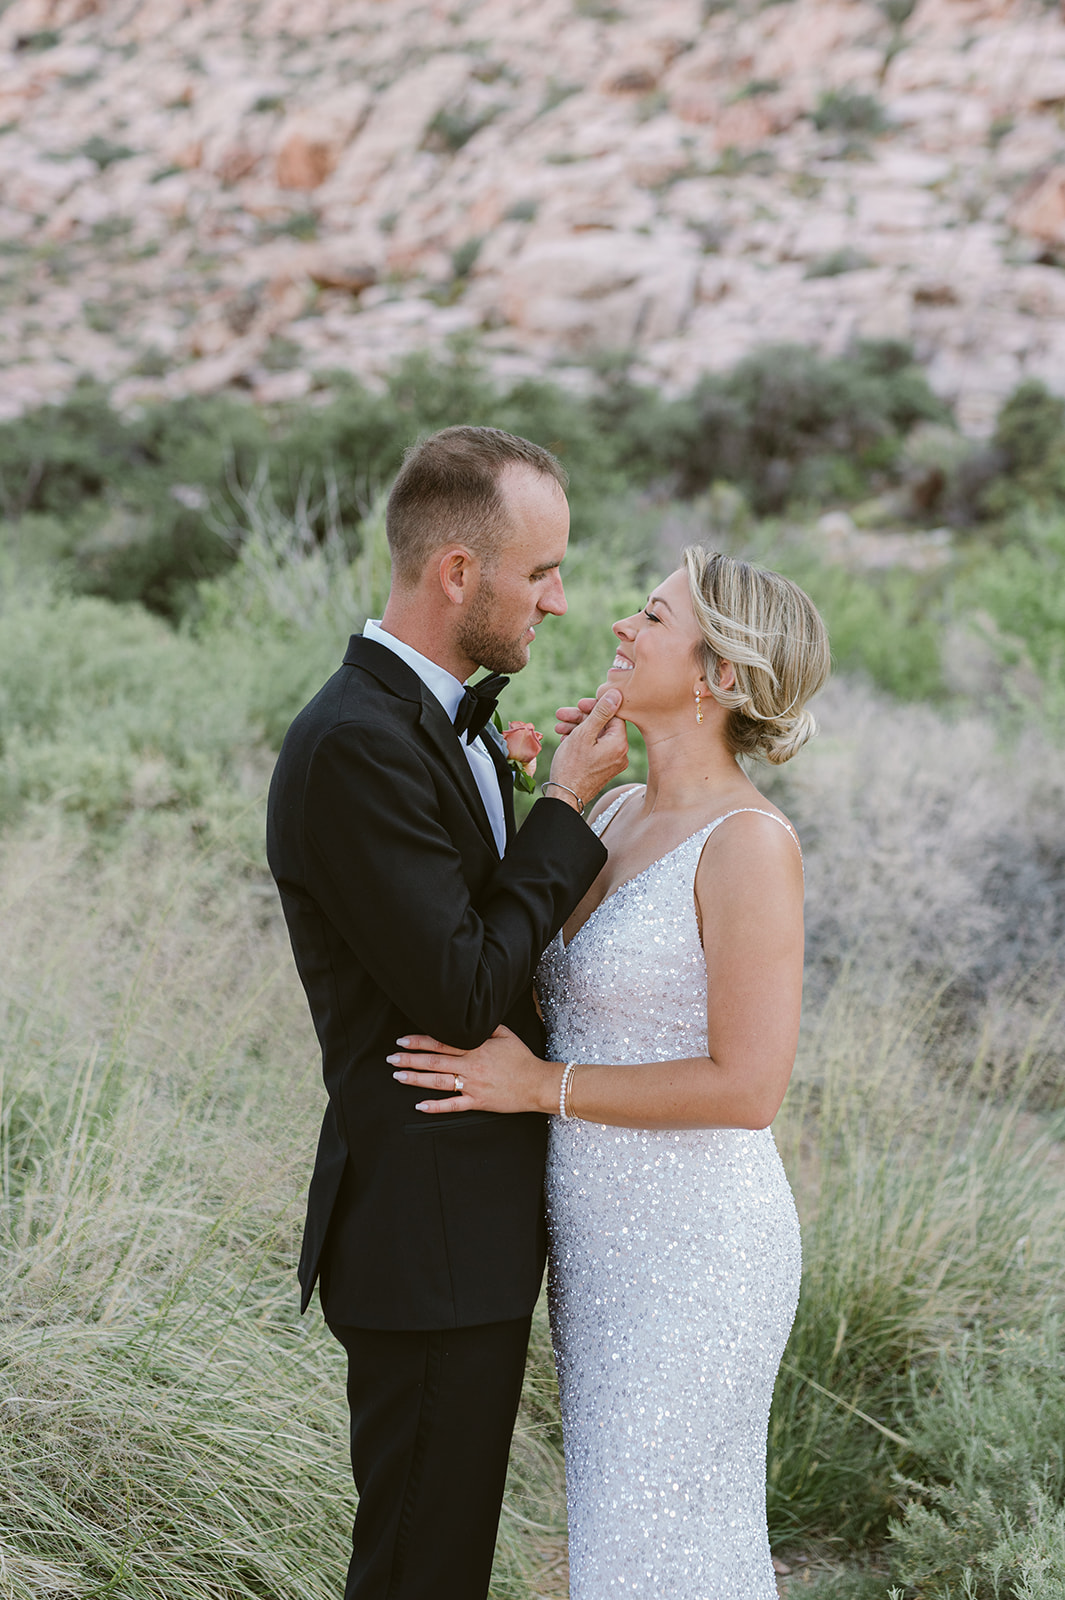 bride and groom embrace on Red Rock Boardwalk with Red Rock Canyon backdrop. Bride wearing glittering white dress.